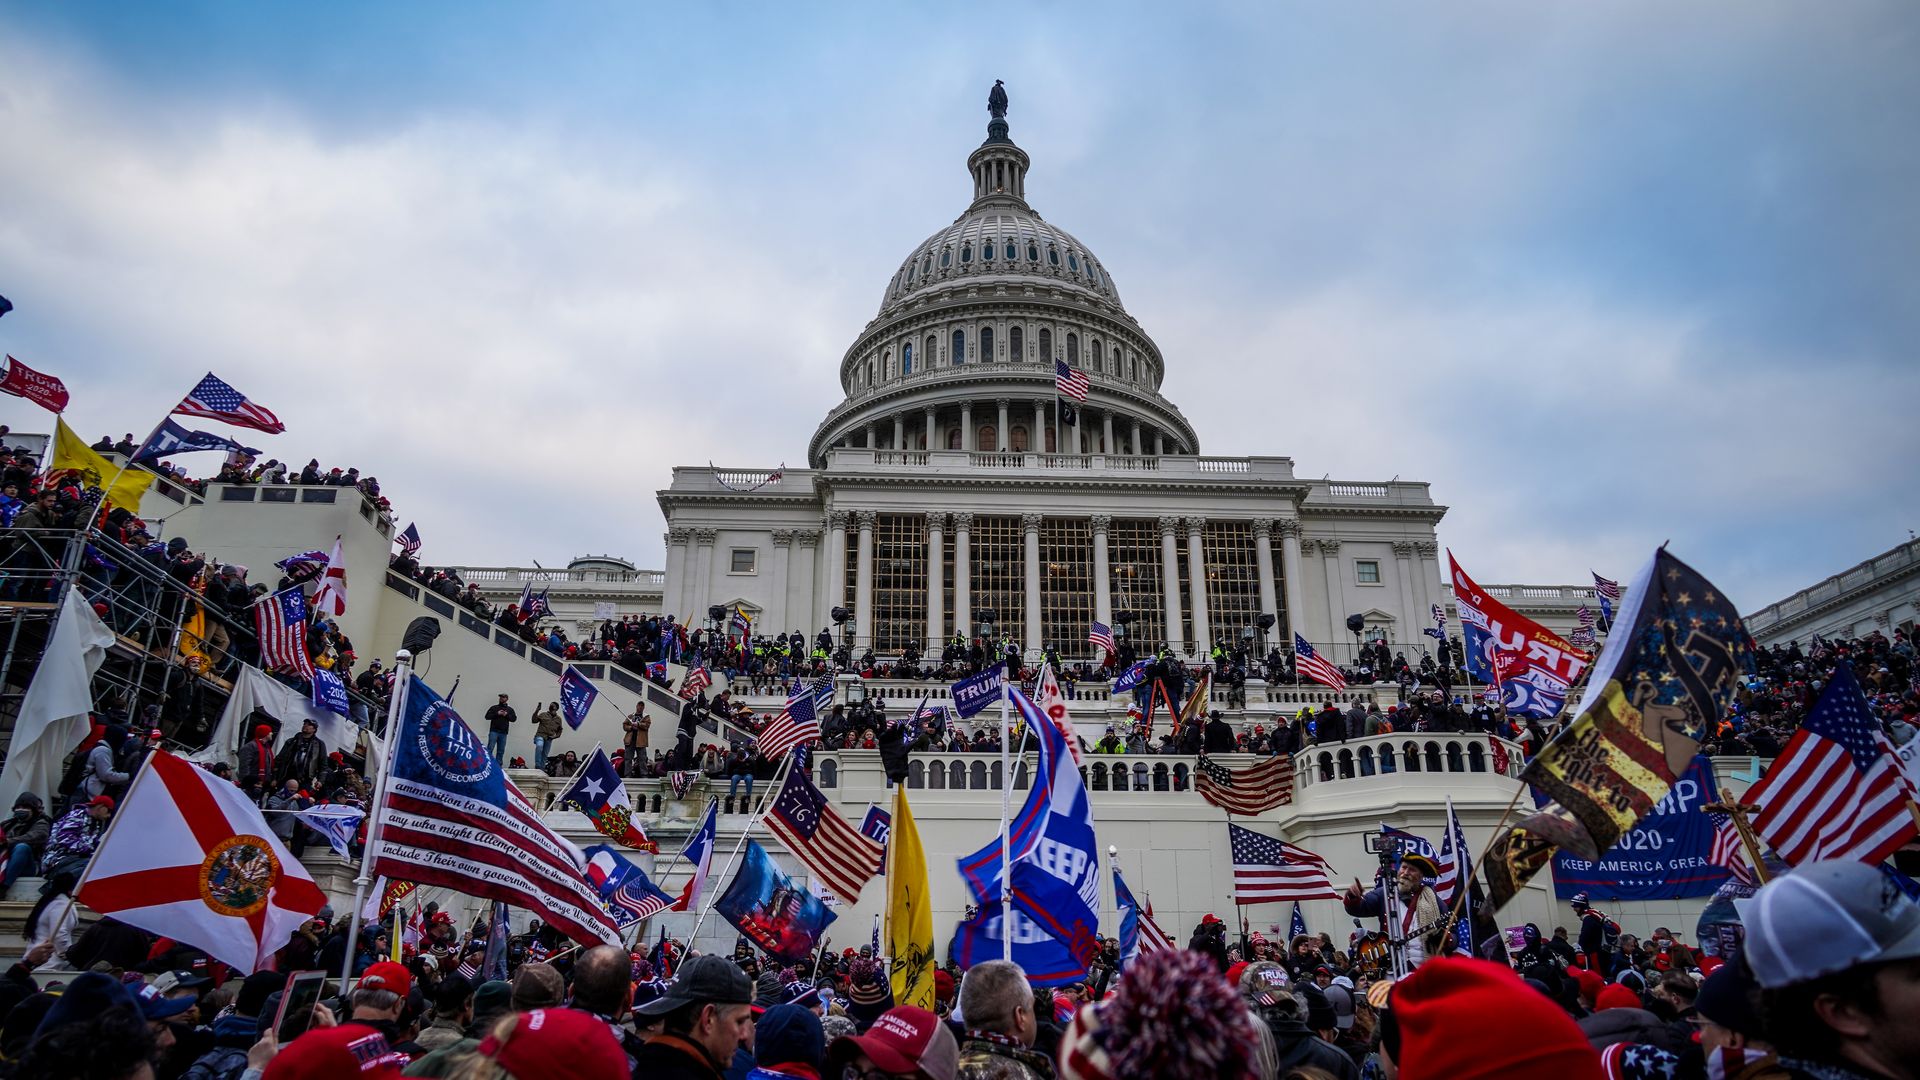 Trump supporters near the US Capitol following a &quot;Stop the Steal&quot; rally on January 06, 2021 in Washington, DC.